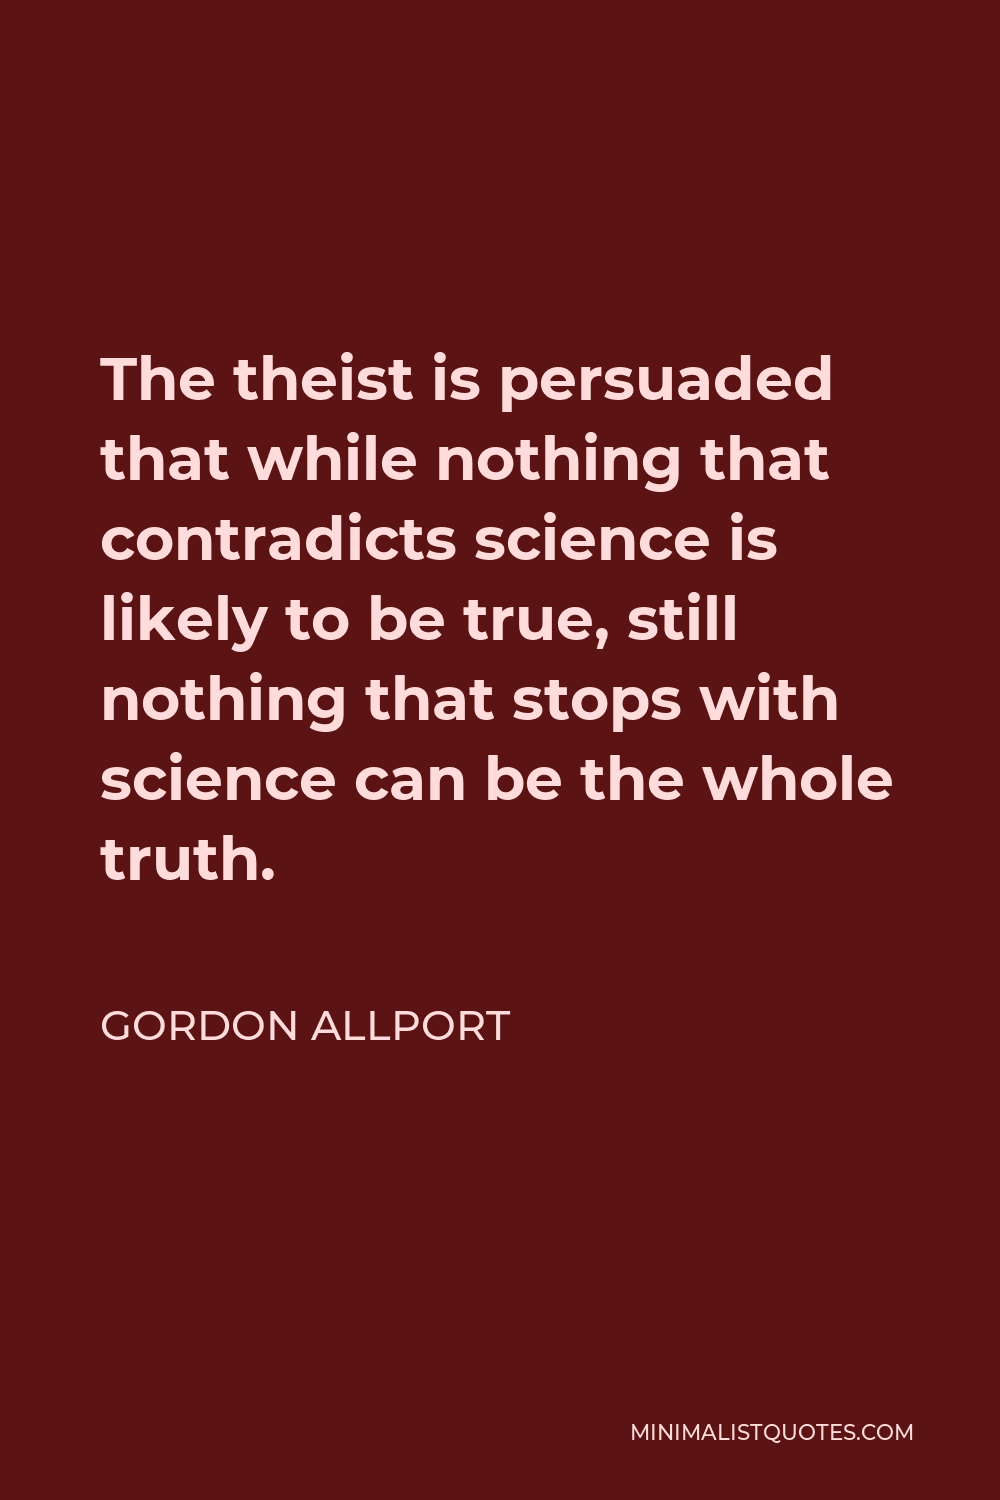 Gordon Allport Quote - The theist is persuaded that while nothing that contradicts science is likely to be true, still nothing that stops with science can be the whole truth.